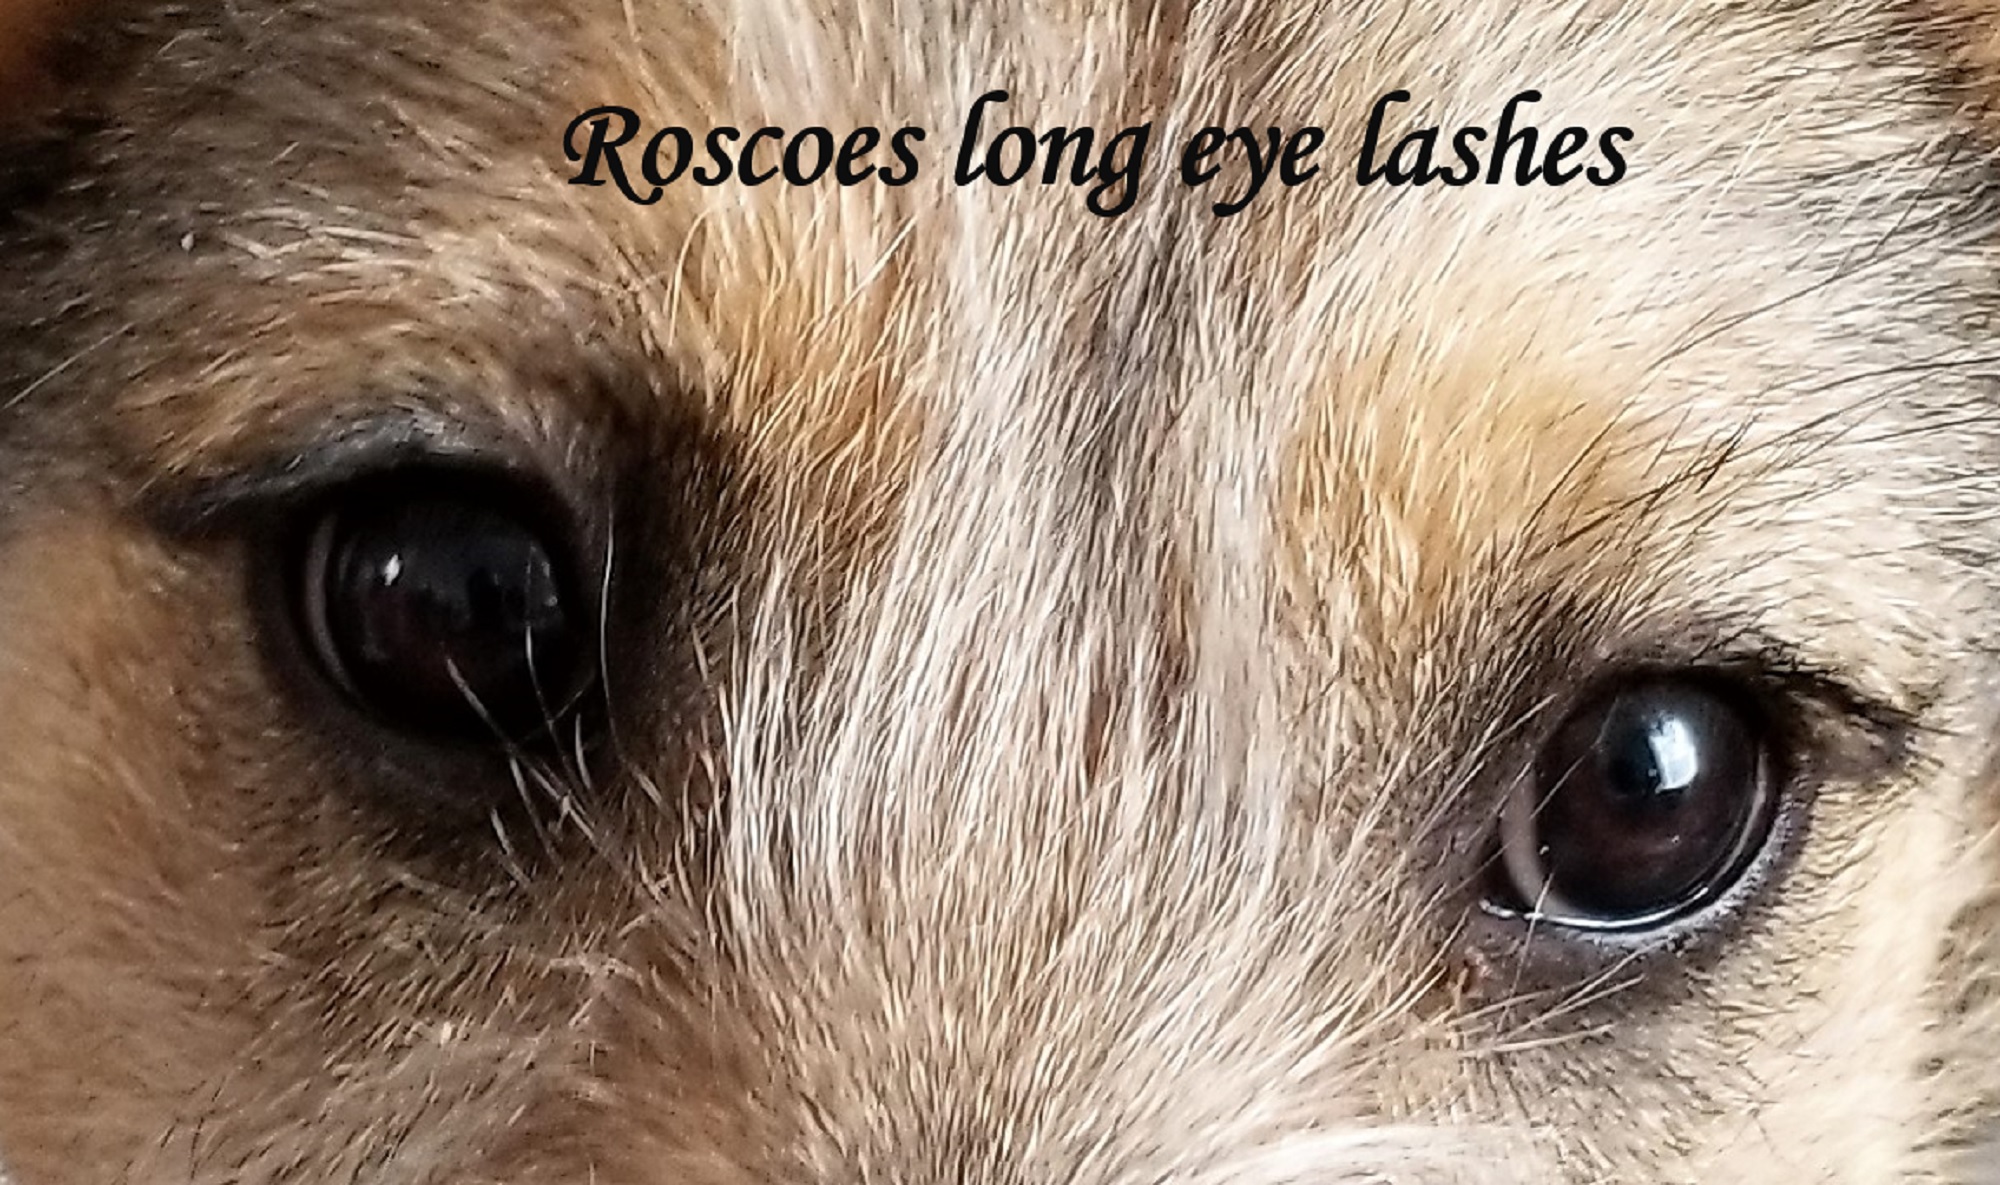 Roscoe has such long lashes